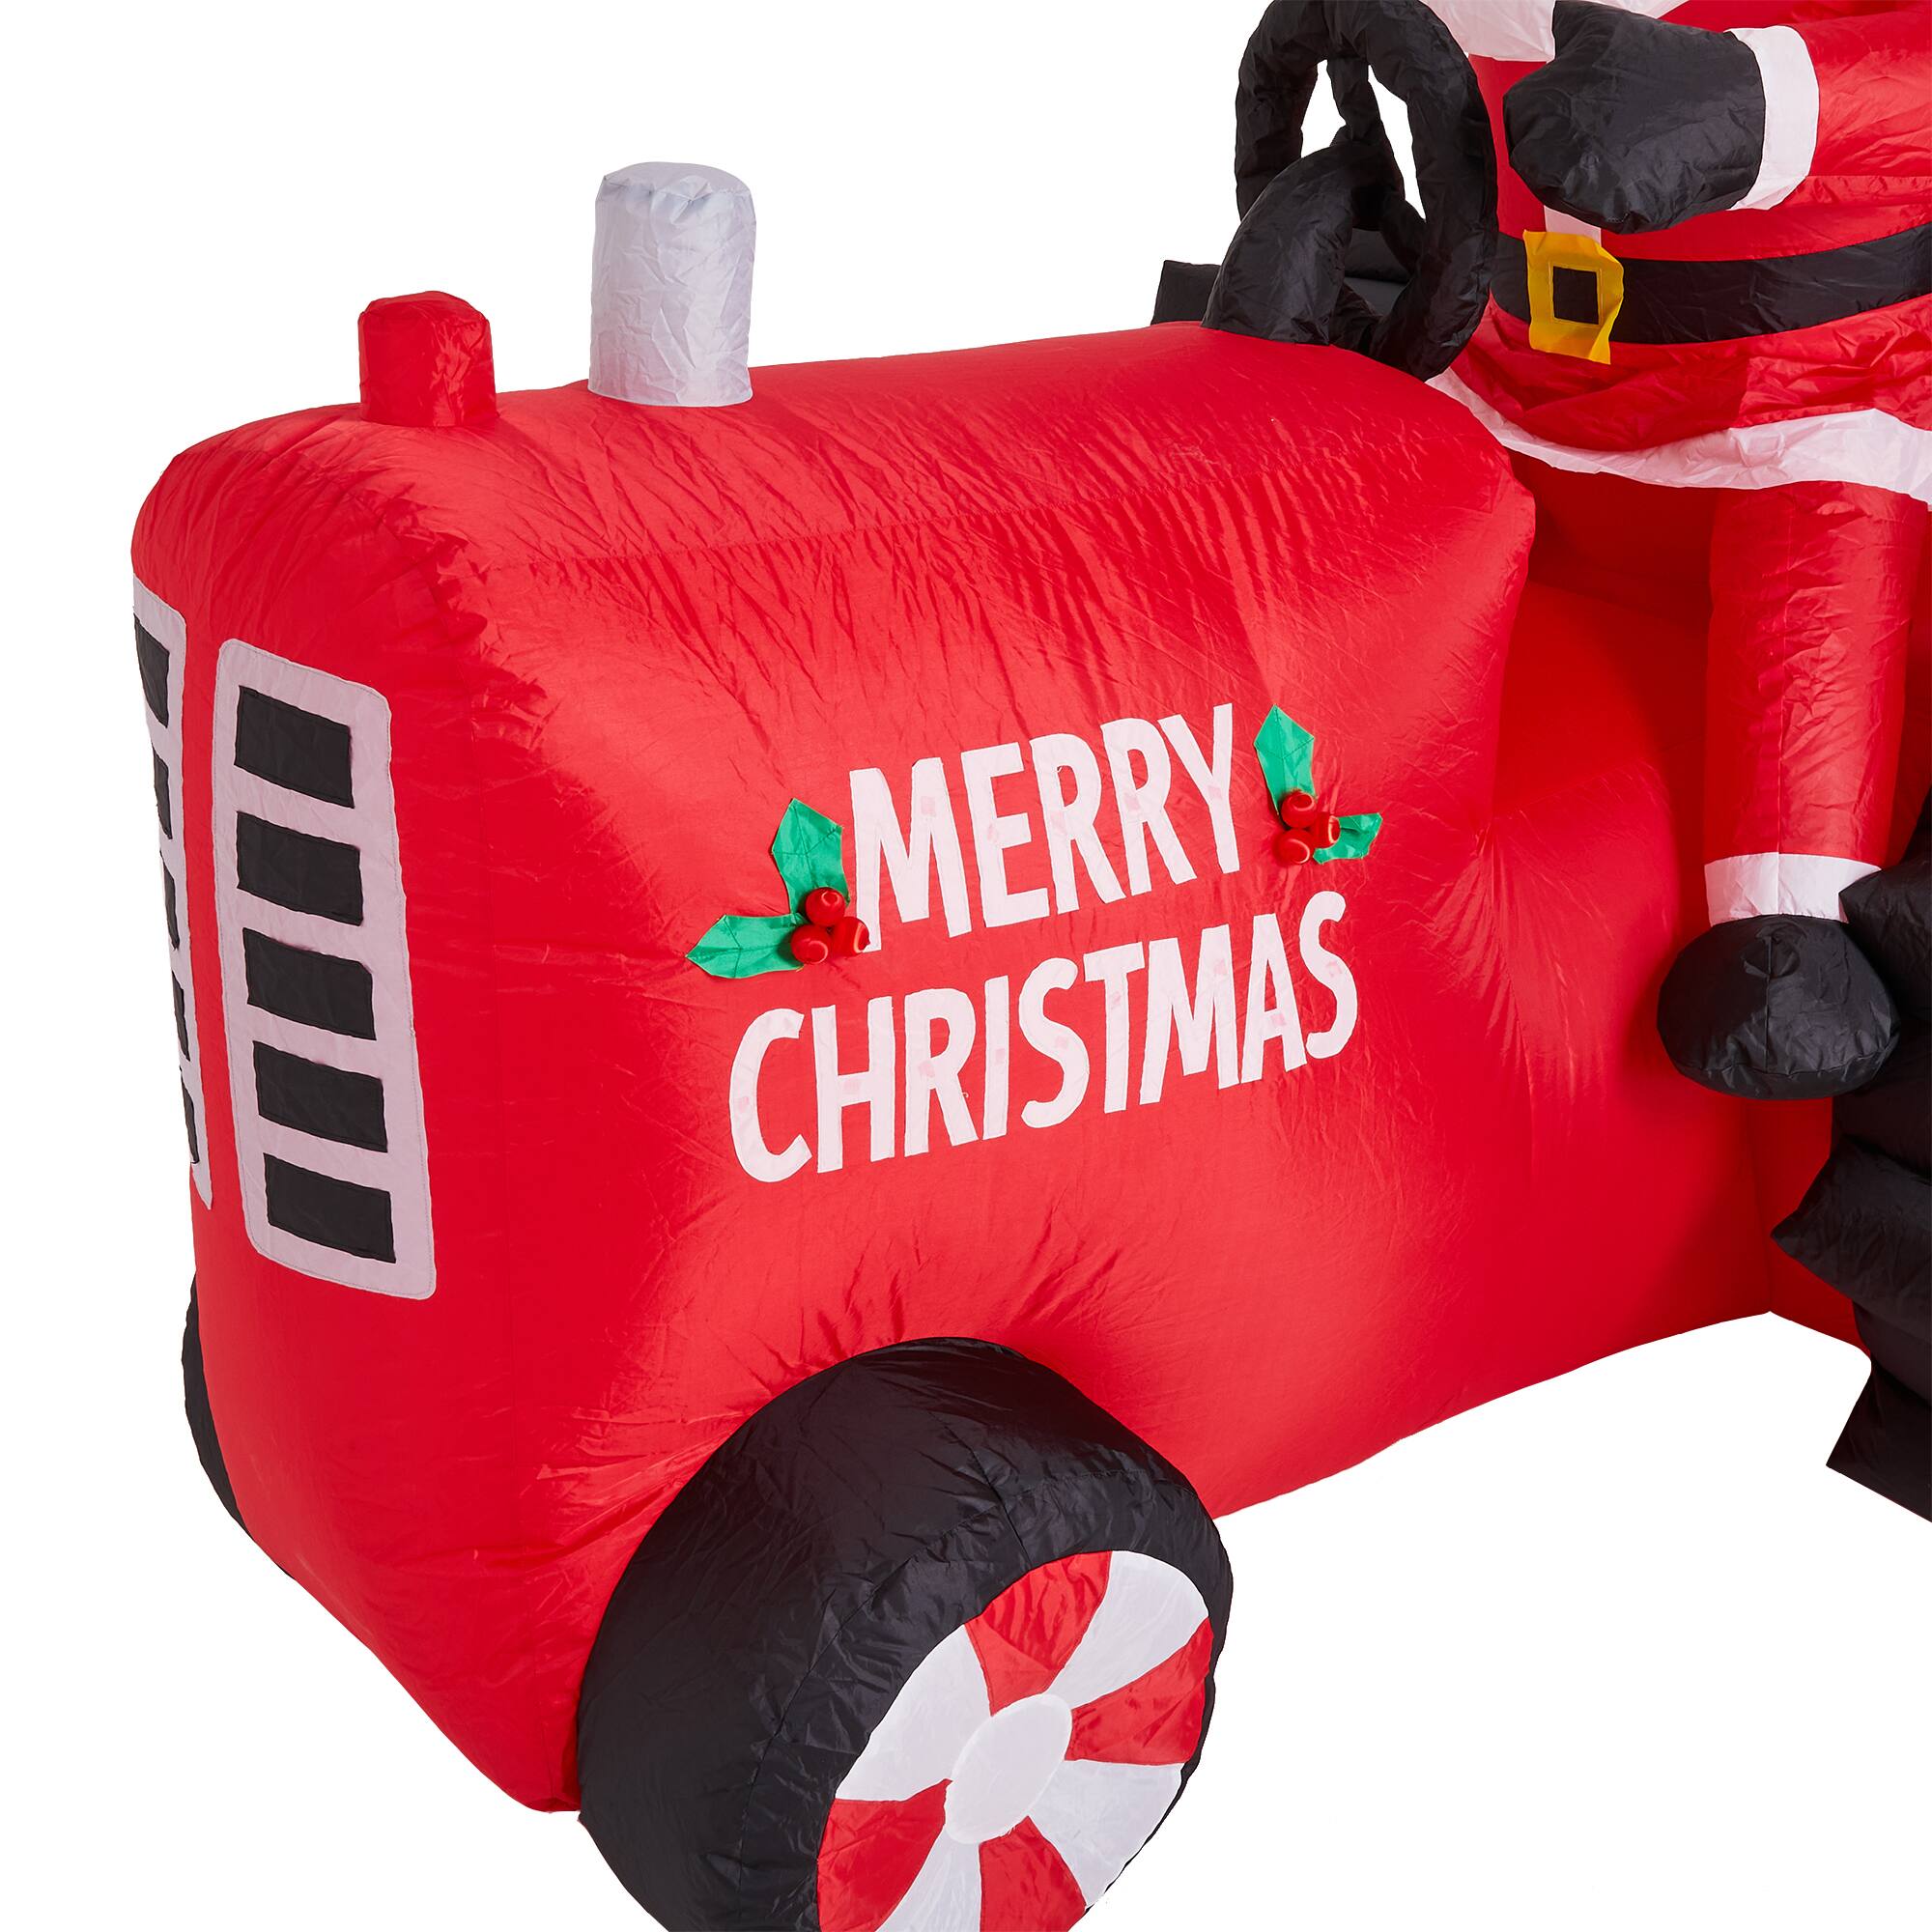 Glitzhome&#xAE; 11ft. Lighted Inflatable Santa on Tractor D&#xE9;cor